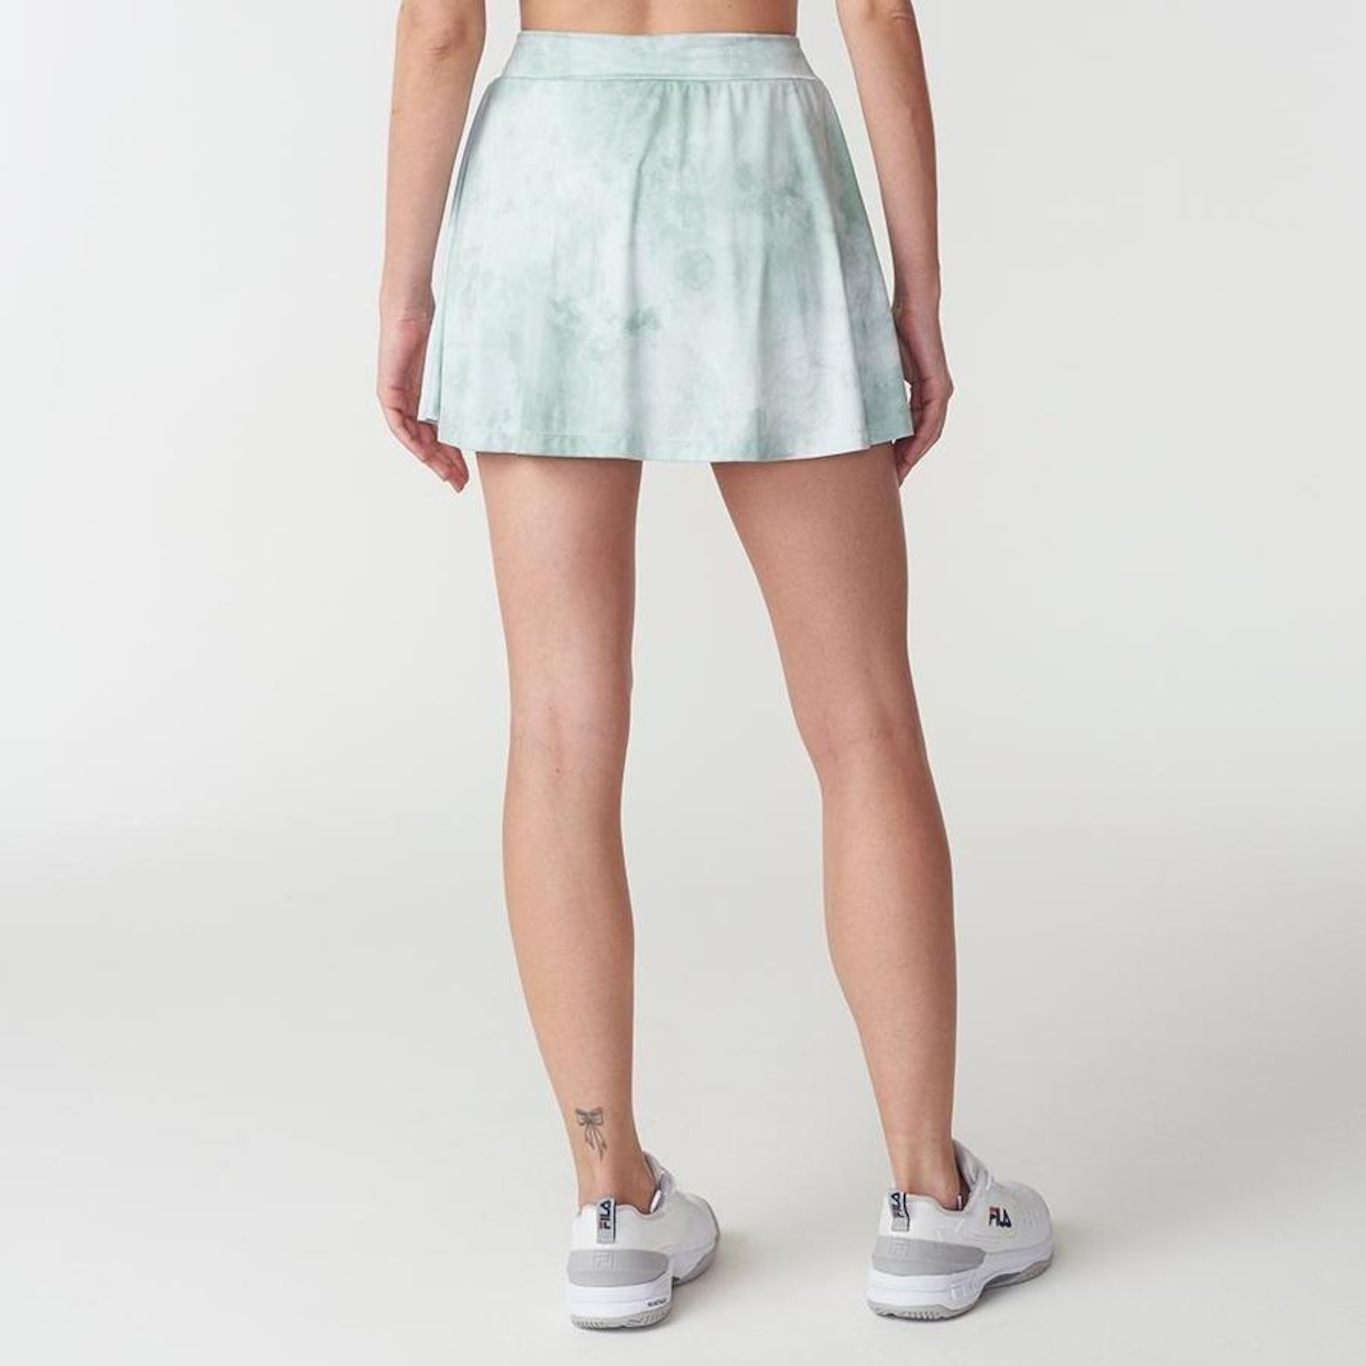 Pace Rival skirt, but make it casual! : r/lululemon